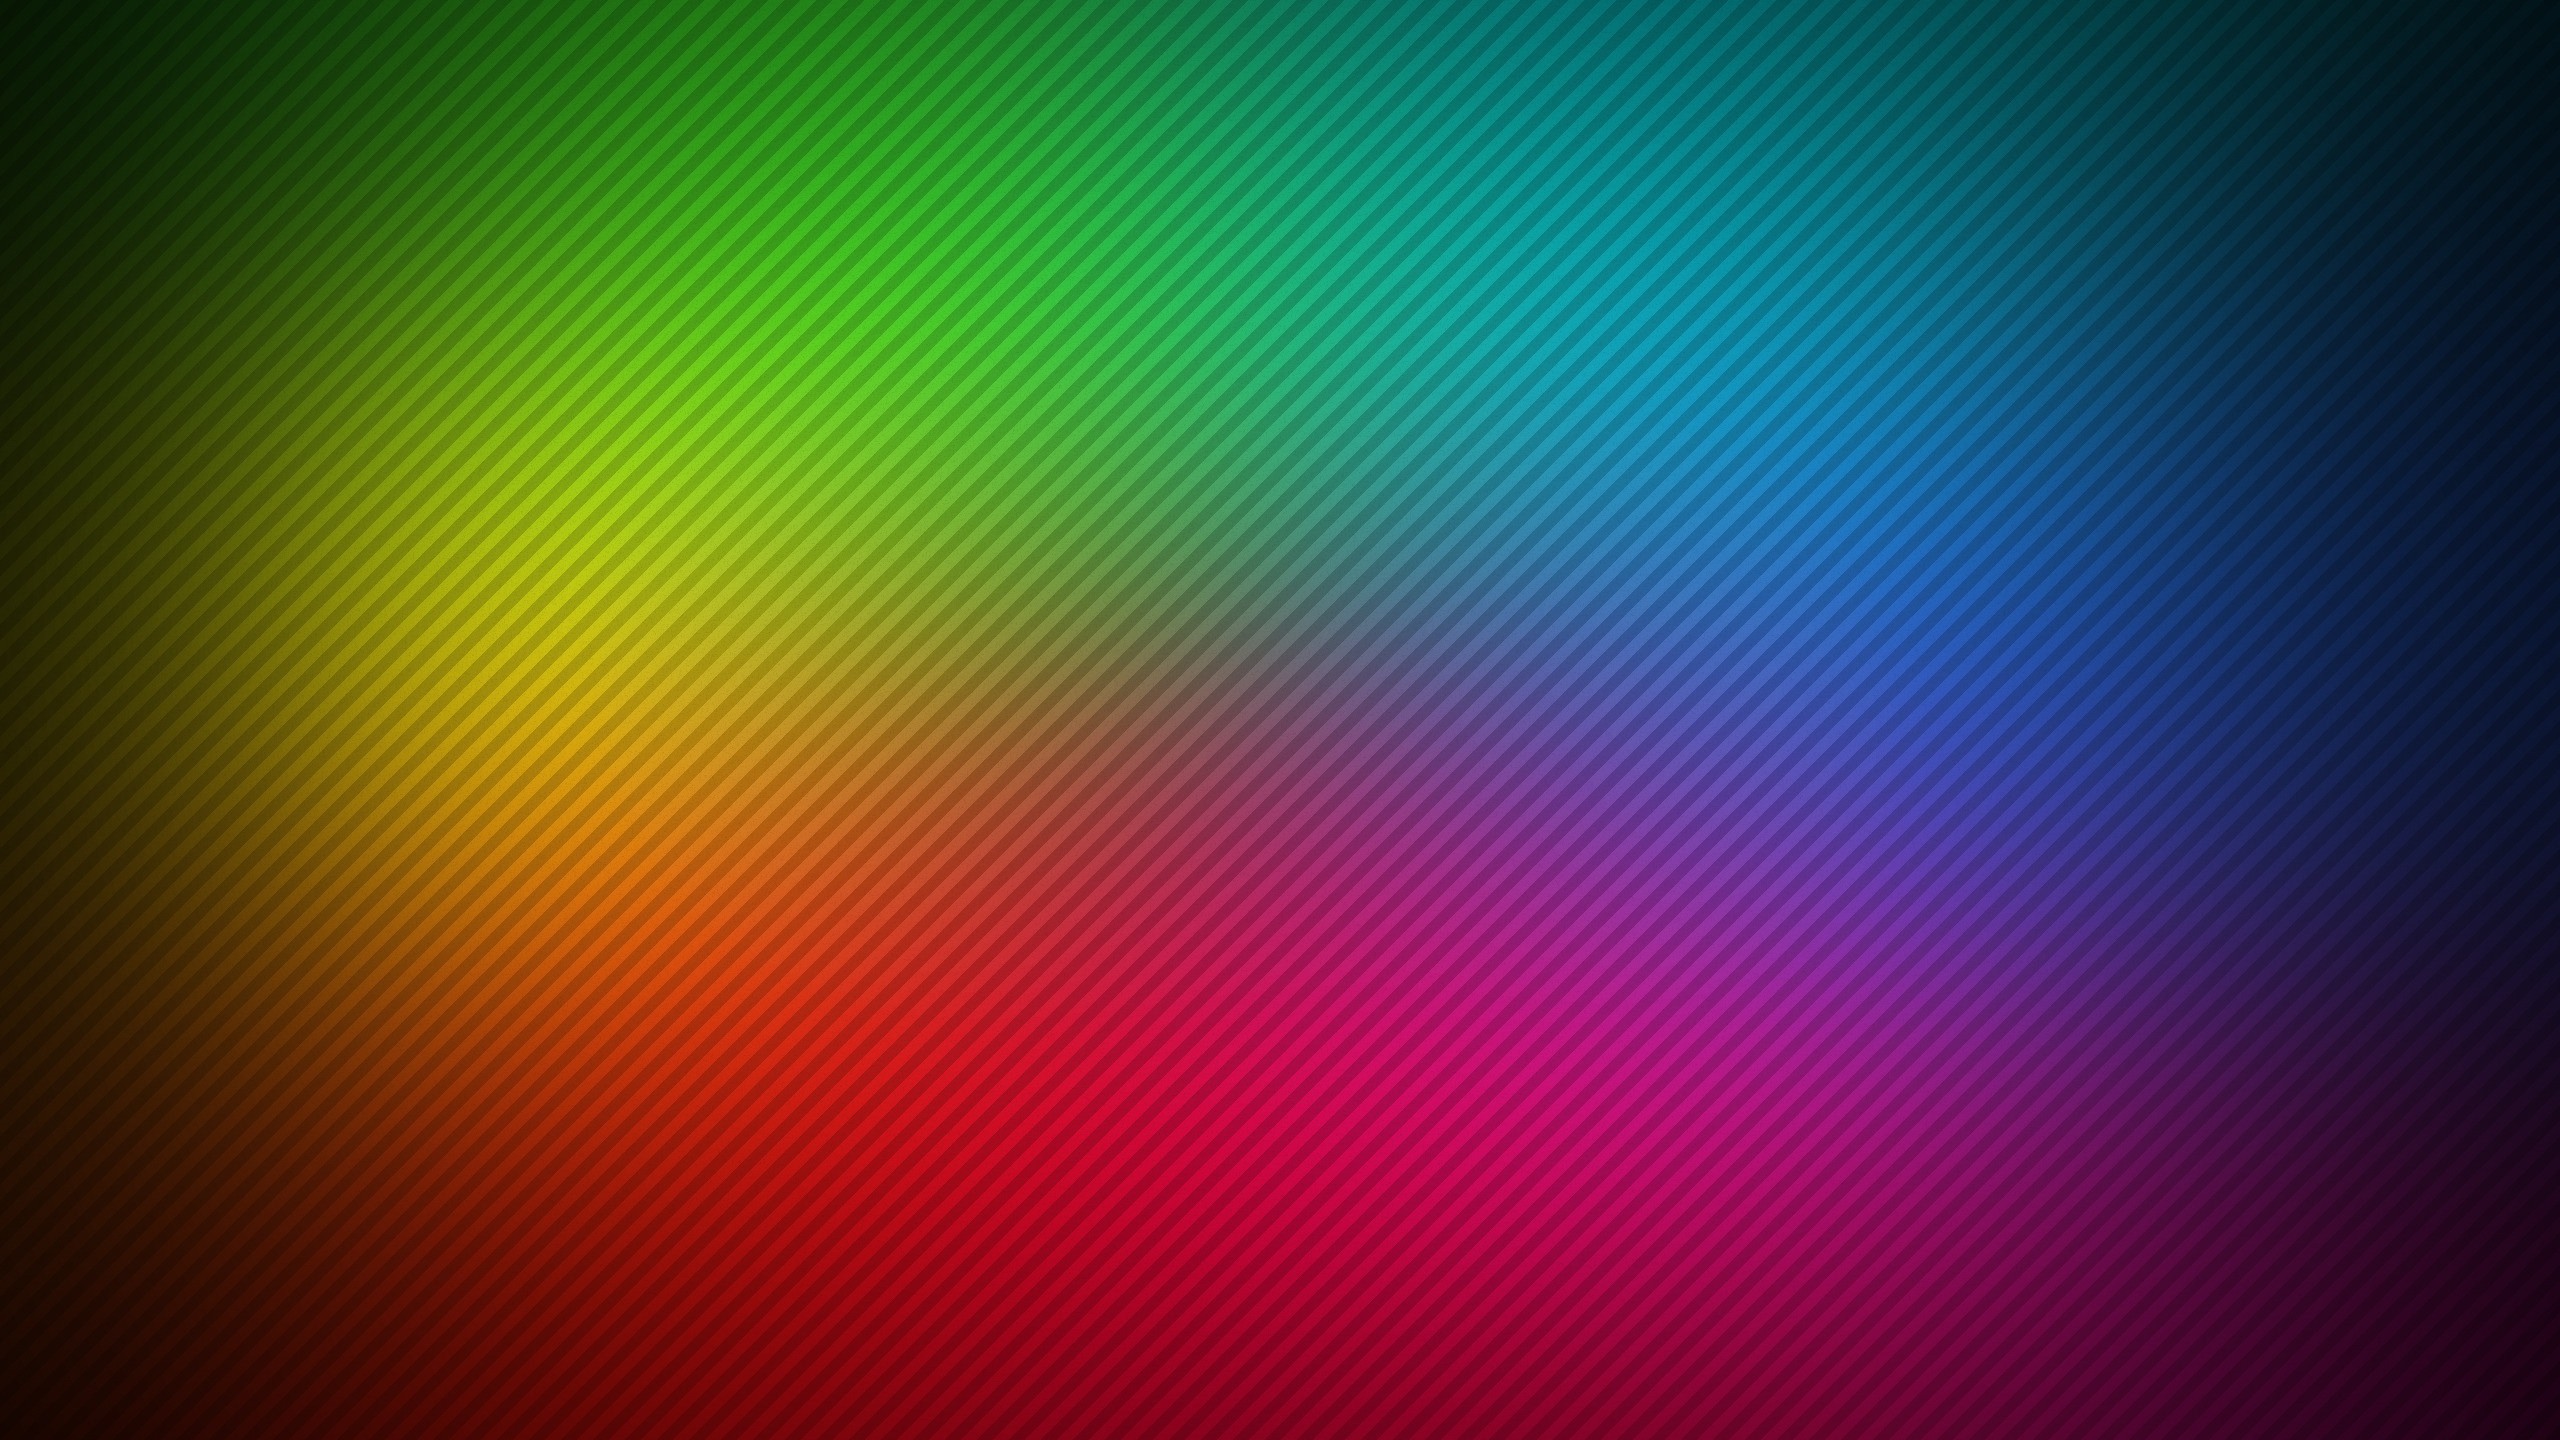 General 2560x1440 simple background gradient texture colorful